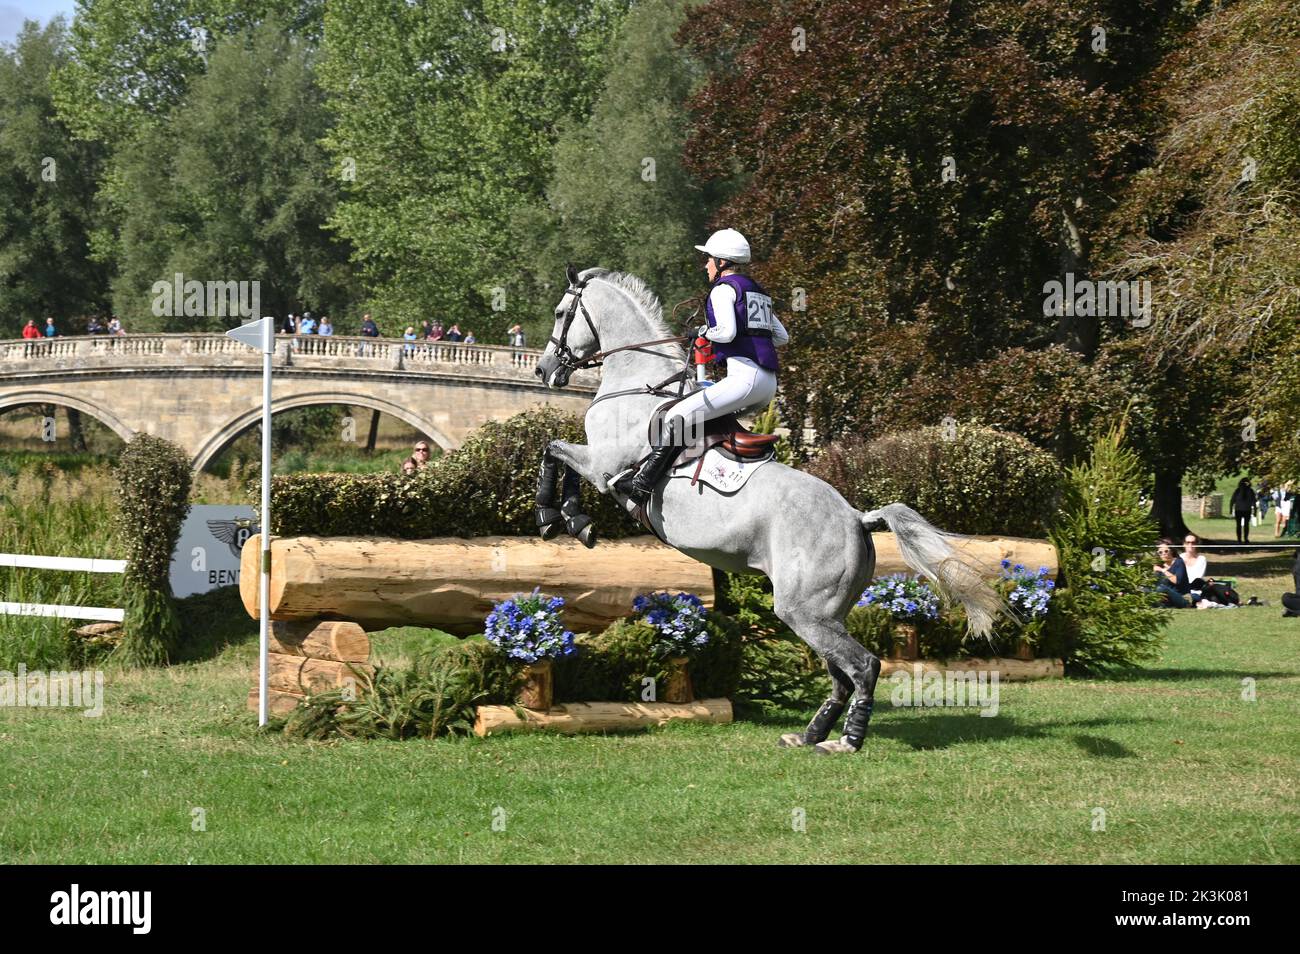 Georgie Campbell on Darcy De La Rose, cross country phase of the CCI4*-S compettion, Blenheim Palace International Horse Trials, Blenheim Palace, Wood Stock Photo